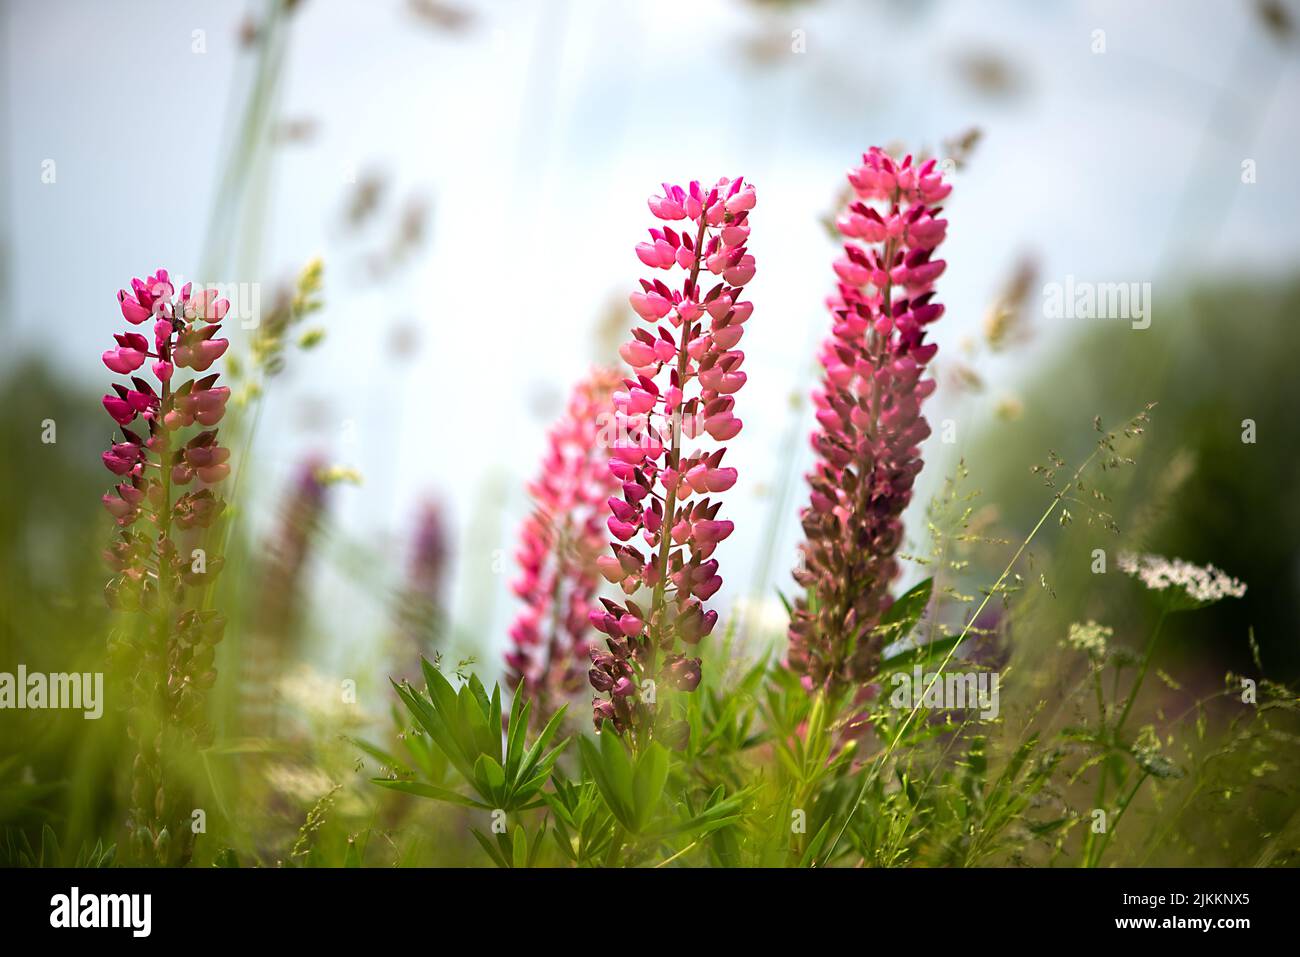 A close-up shot of long, pink flowers in a meadow isolated on a blurred background Stock Photo